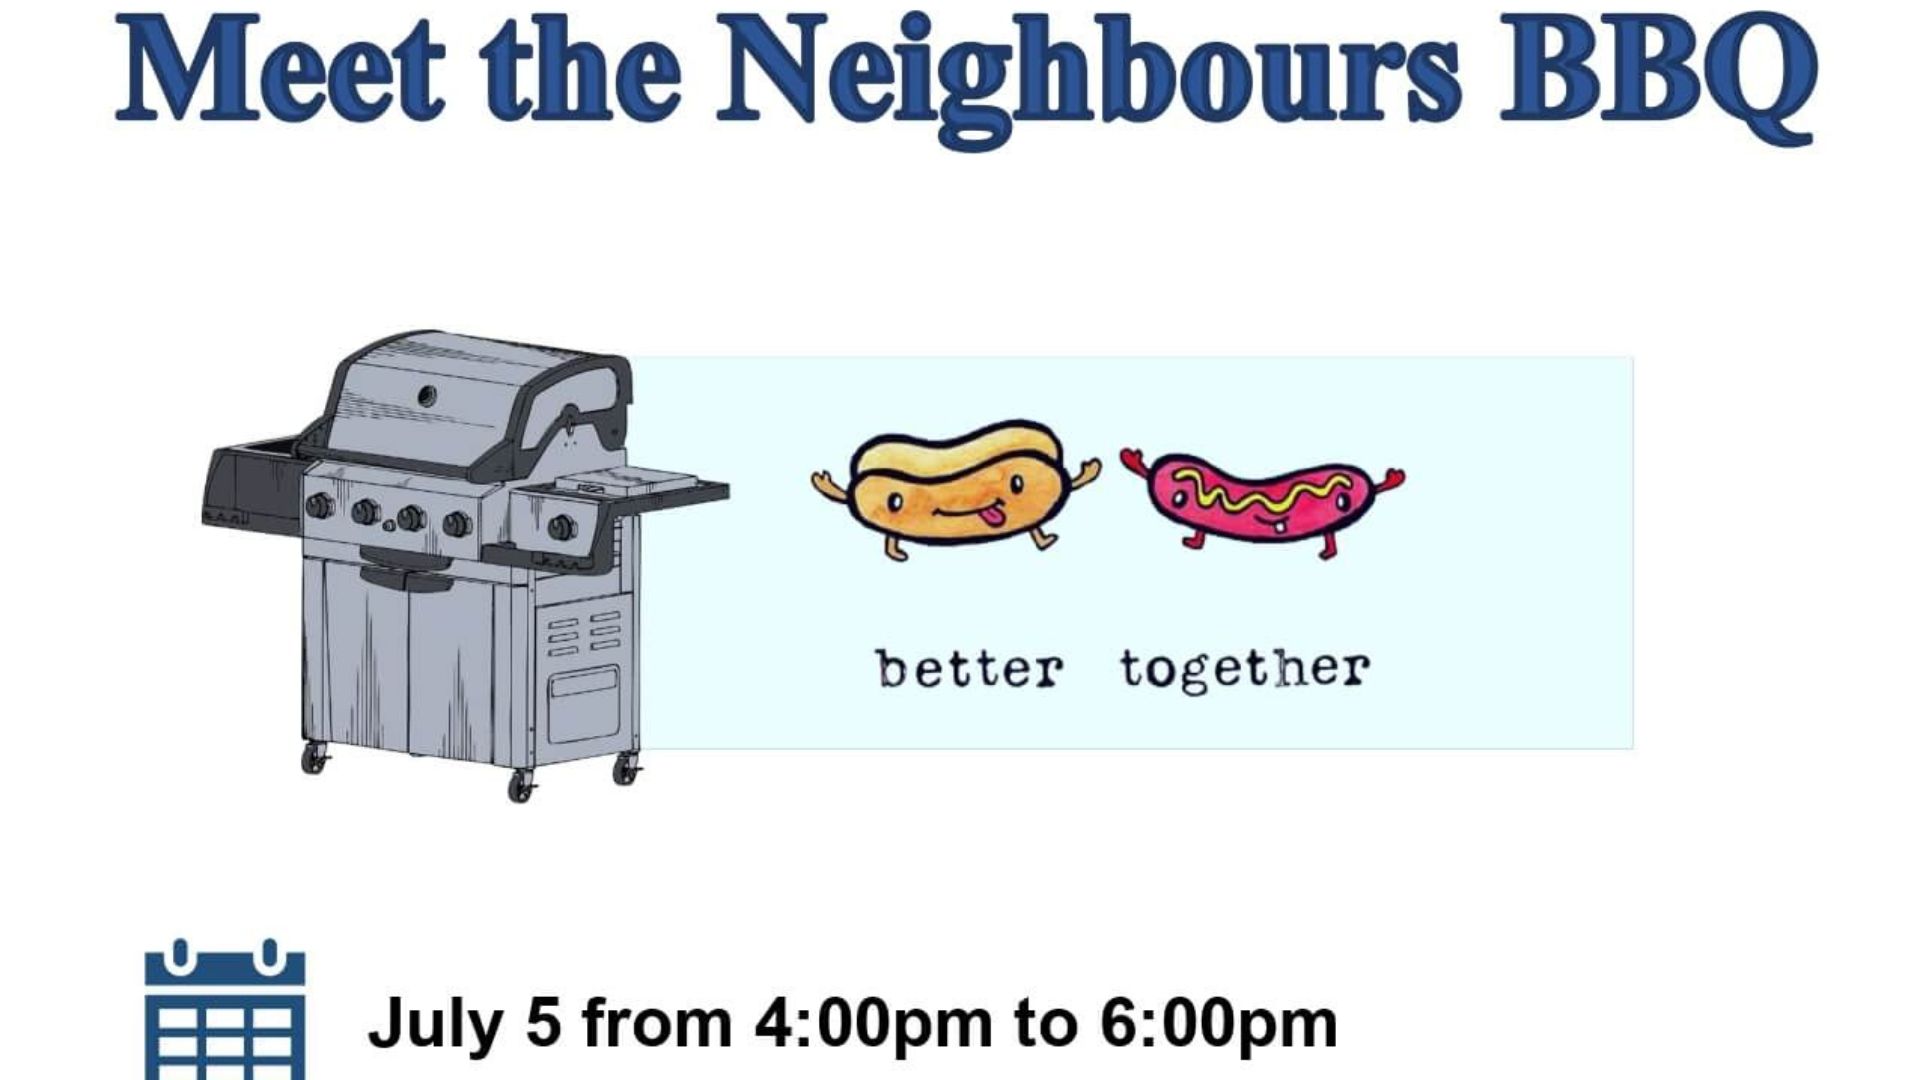 You are invited to IRCOM’s Meet the Neighbours BBQ 